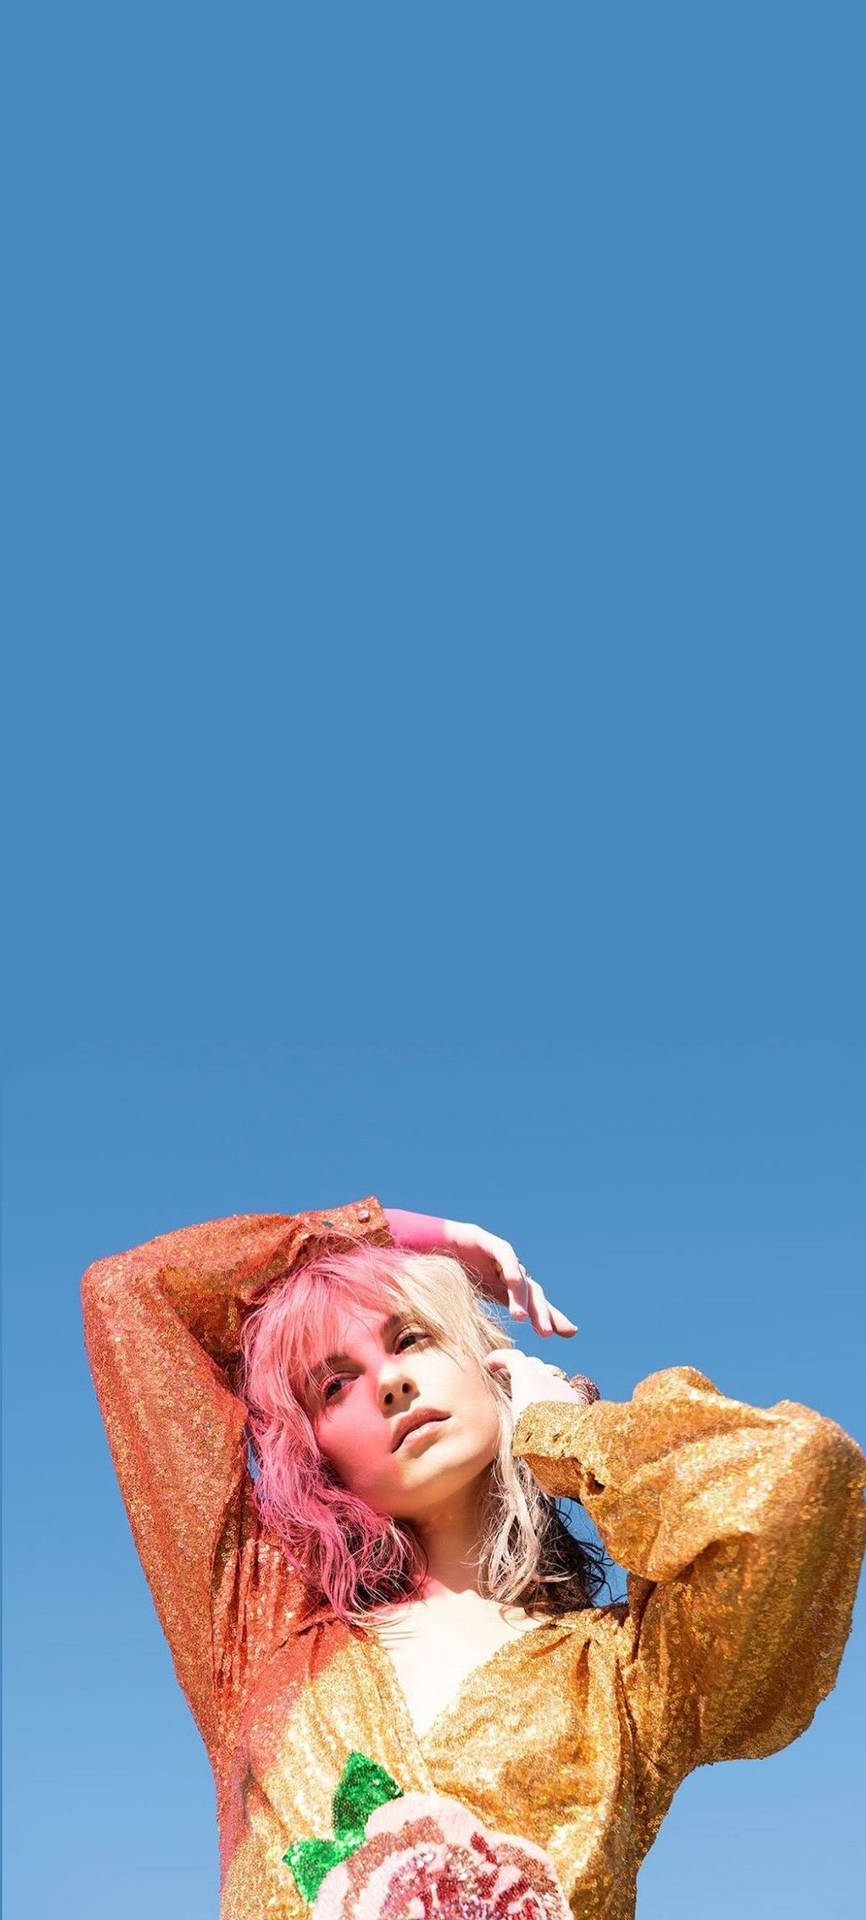 Aesthetic Hayley Williams Low Angle Photo Wallpaper